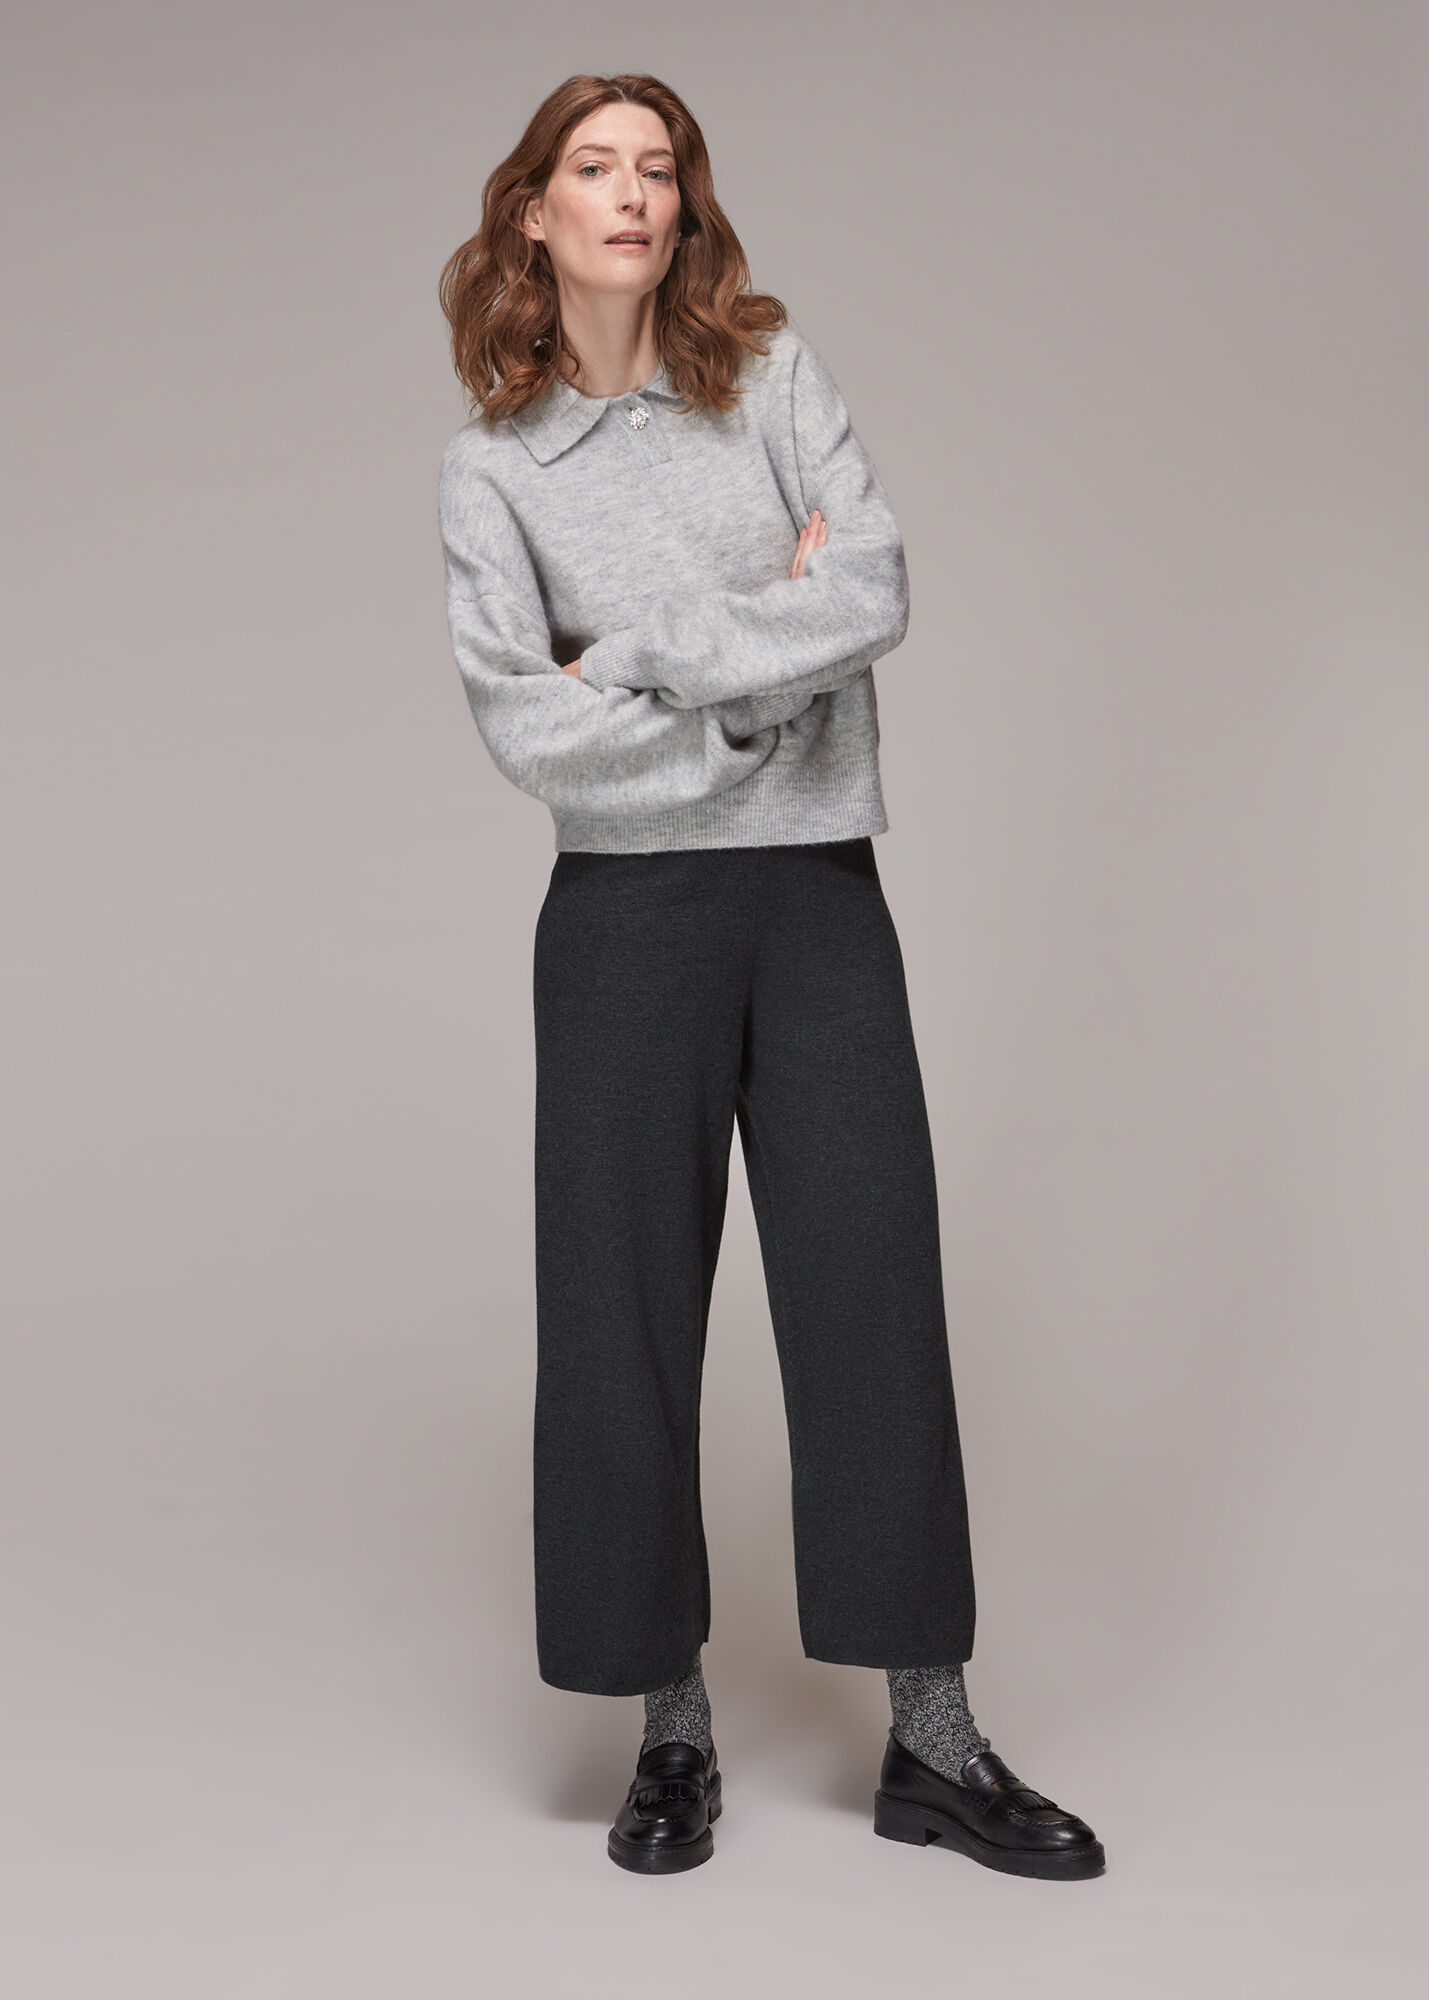 Grey Marl Knitted Wide Leg Marl Trouser | WHISTLES